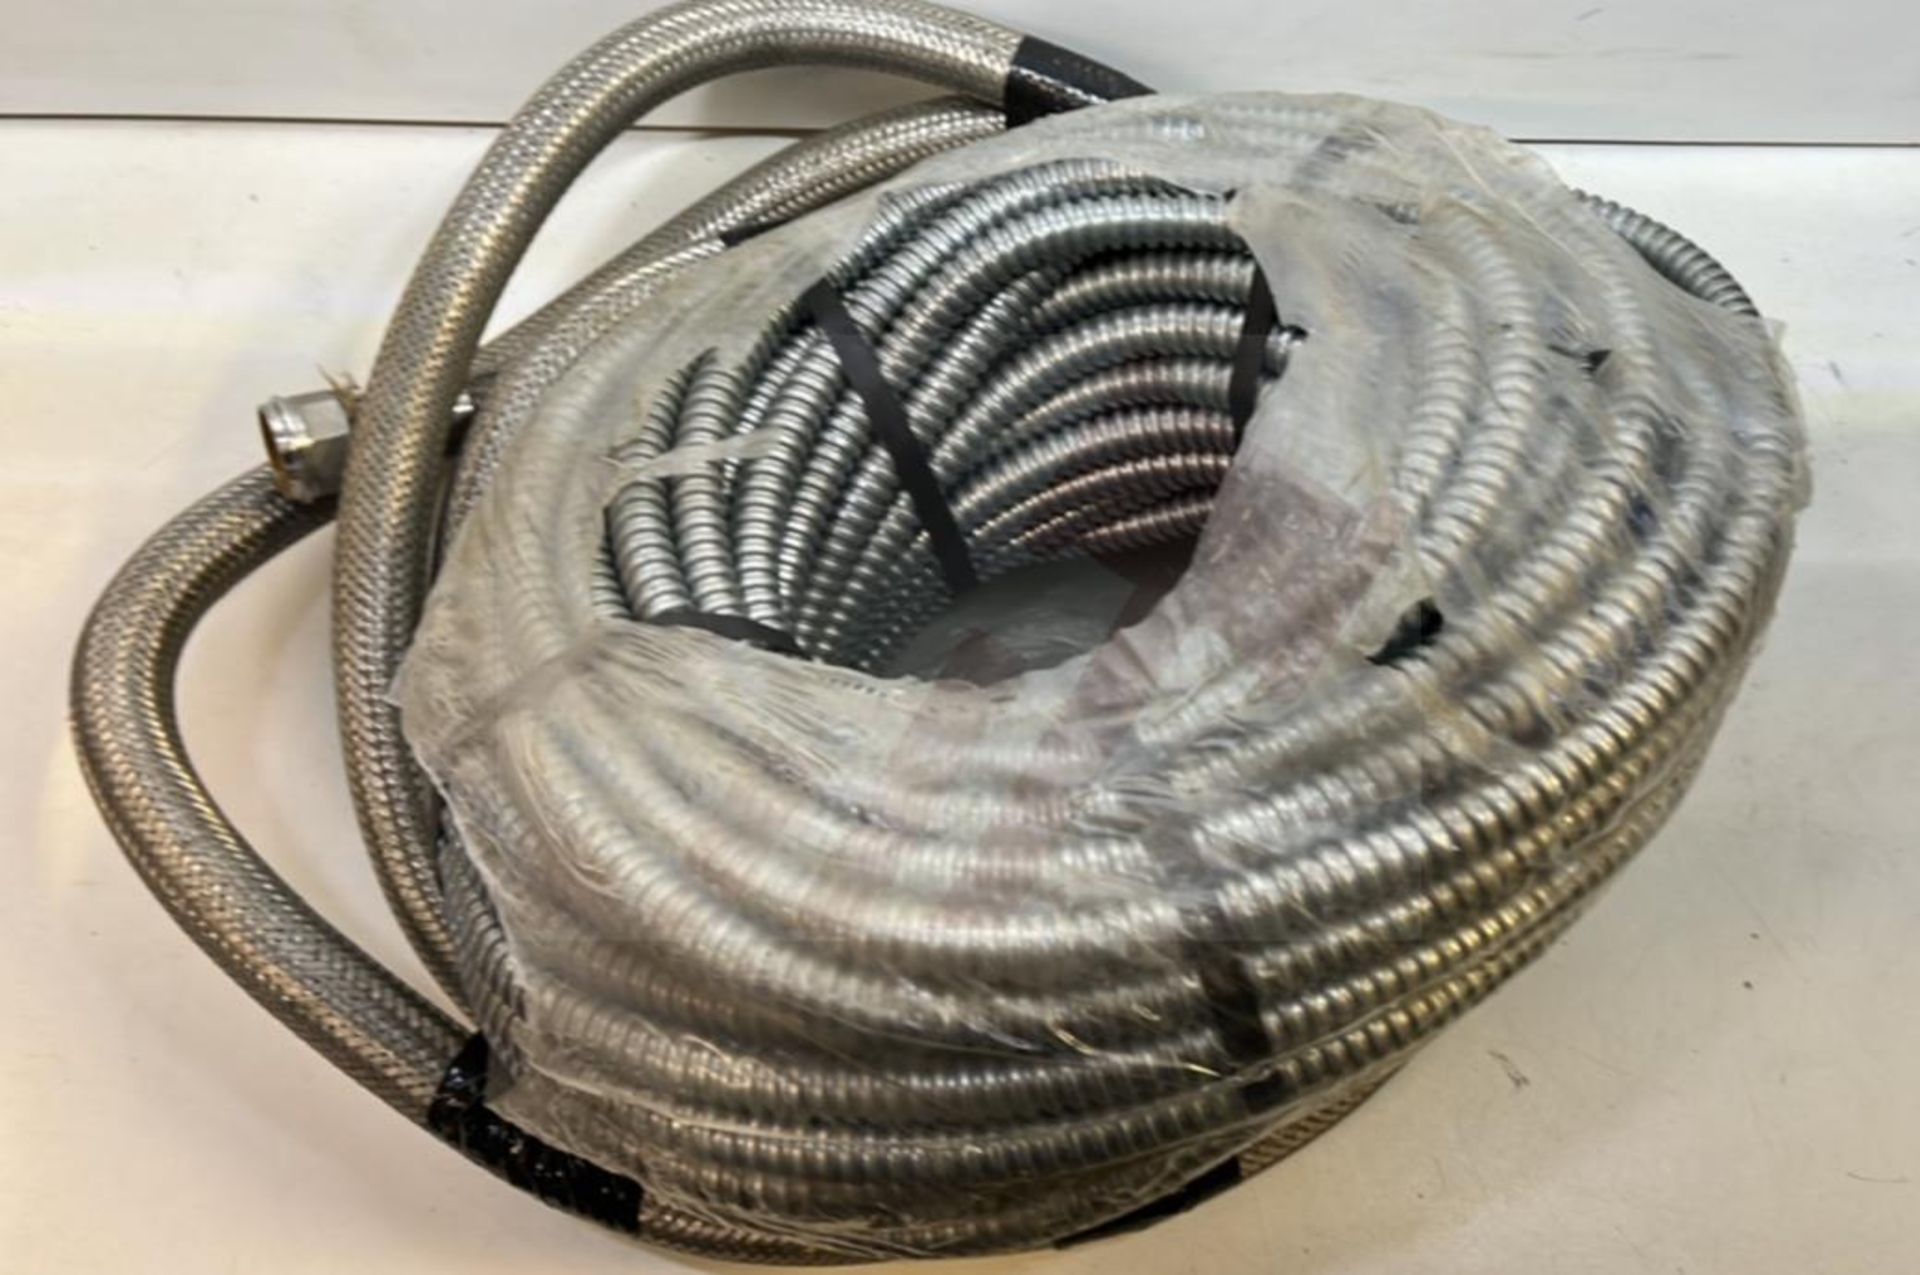 3 x Various Hoses/Pipes - As Pictured